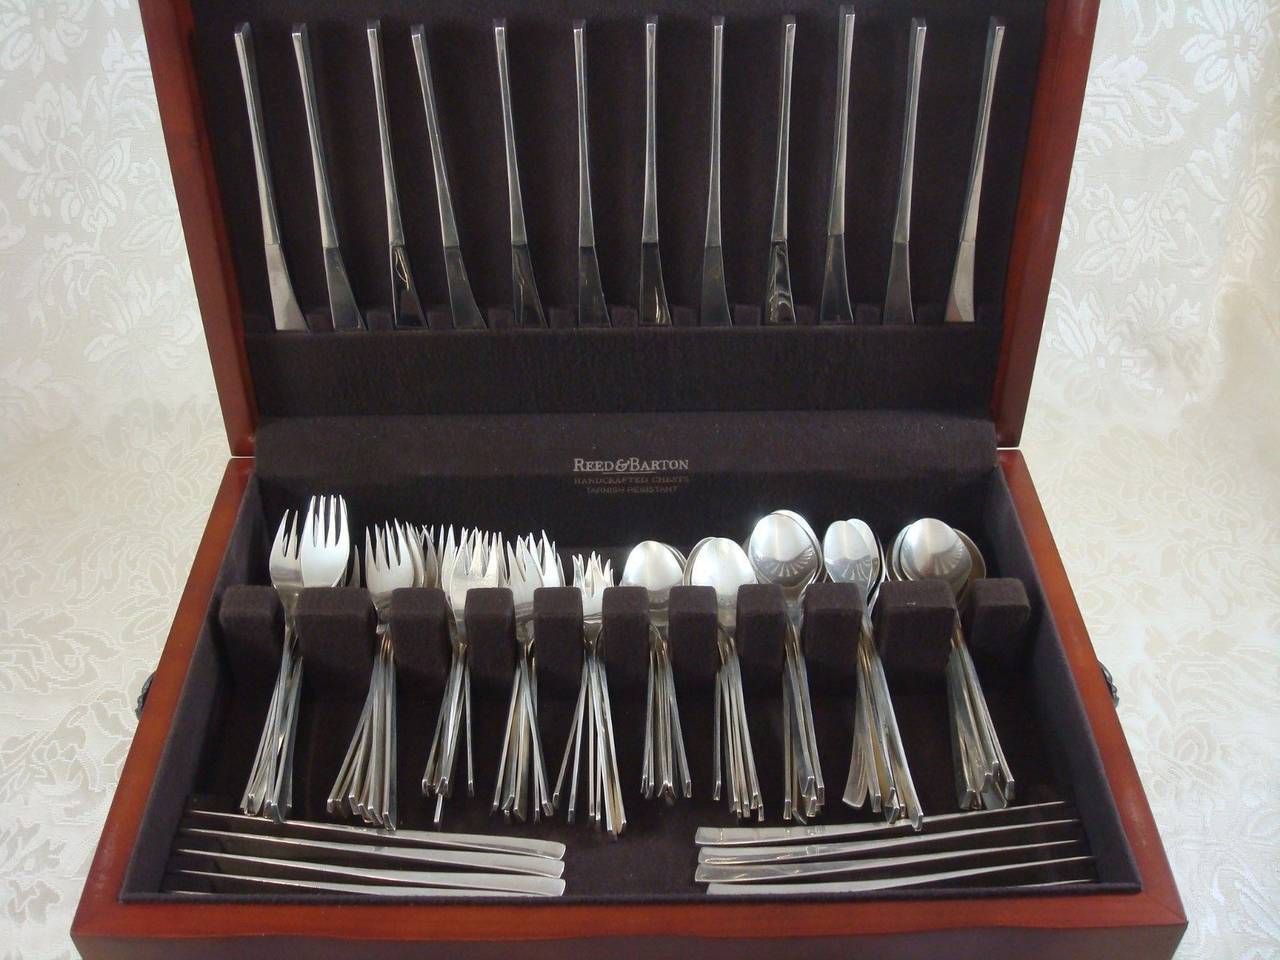 A set for 12 vintage International sterling flatware in the pattern Vision designed by Ronald Hayes Pearson patented in 1961. This discontinued pattern features clean, Modernisn inspired lines and is featured in the book 